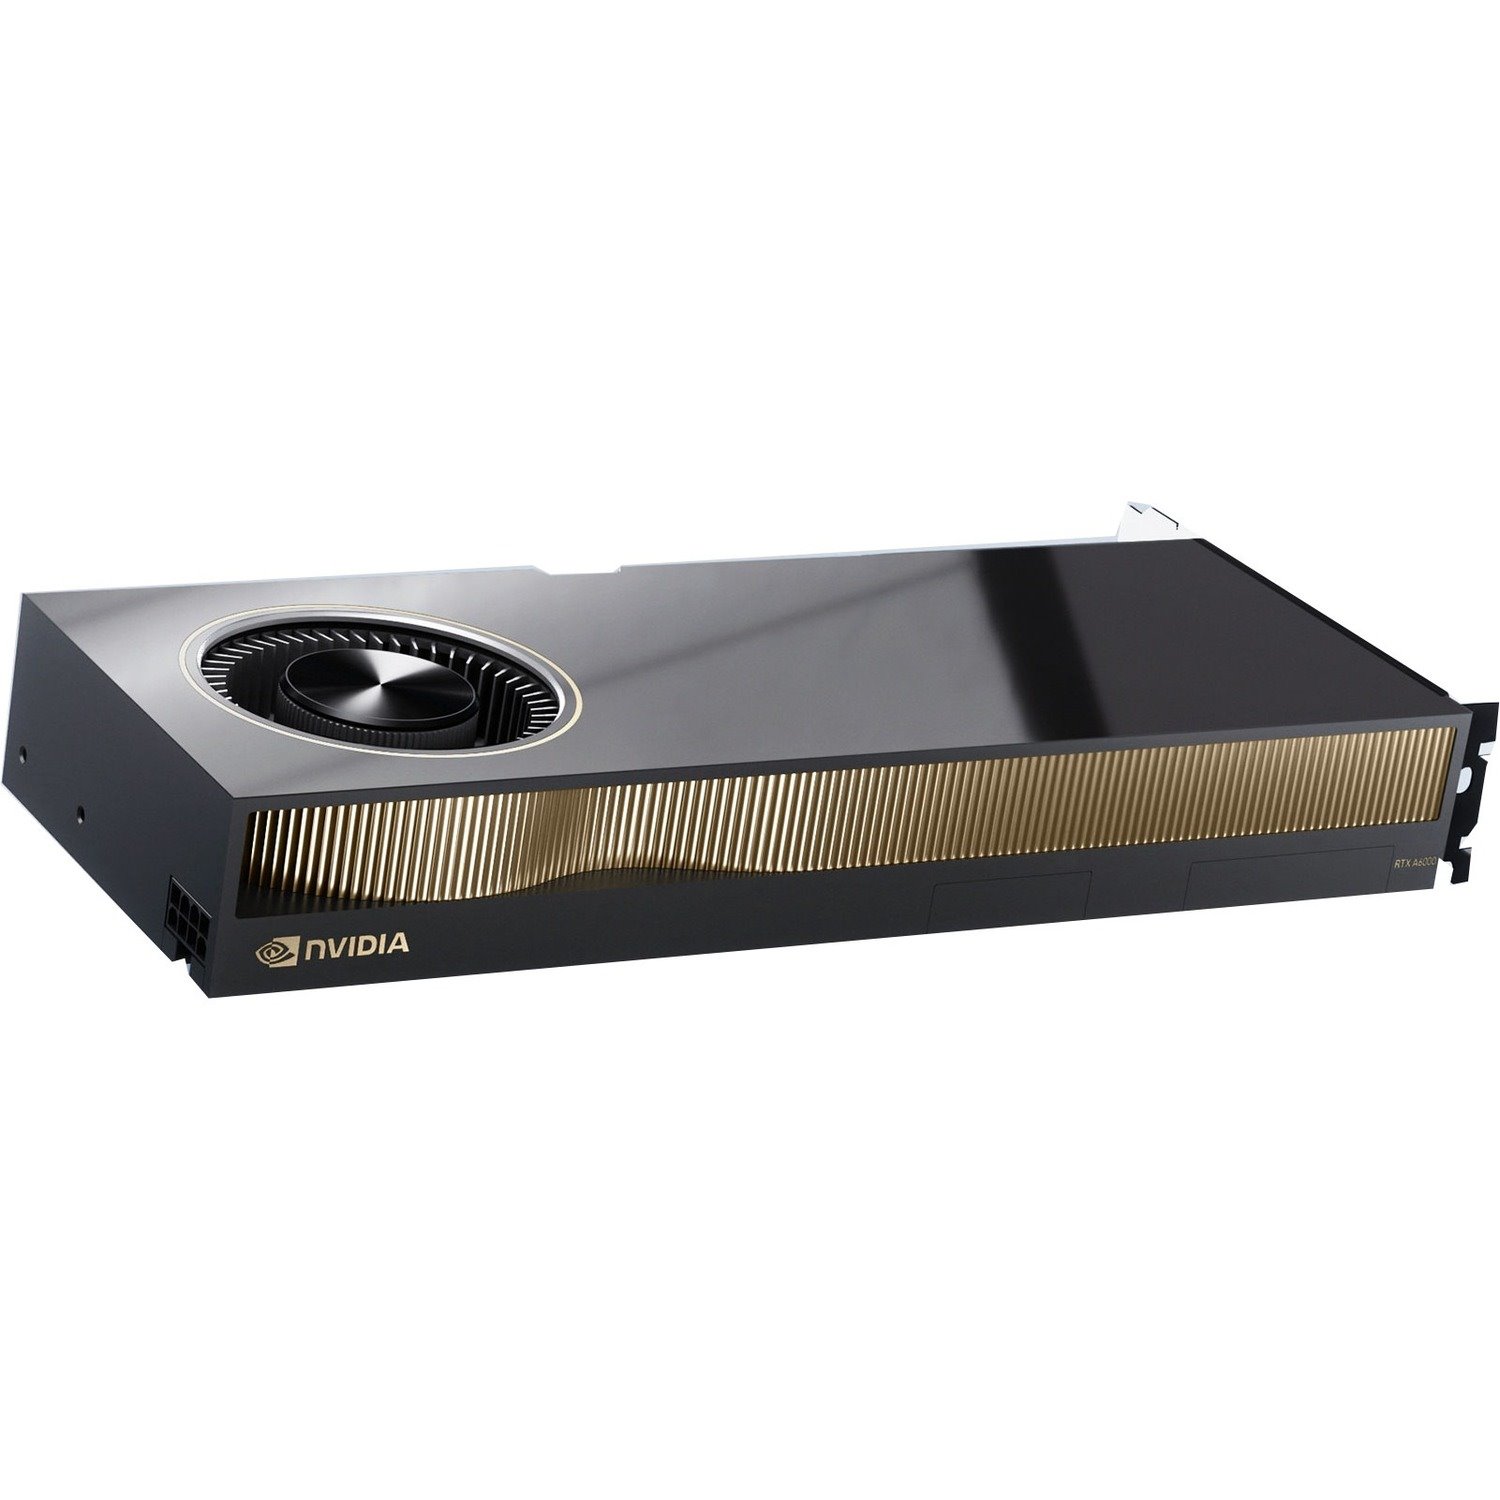 PNY NVIDIA RTX A6000 Graphic Card - 48 GB GDDR6 - Full-height